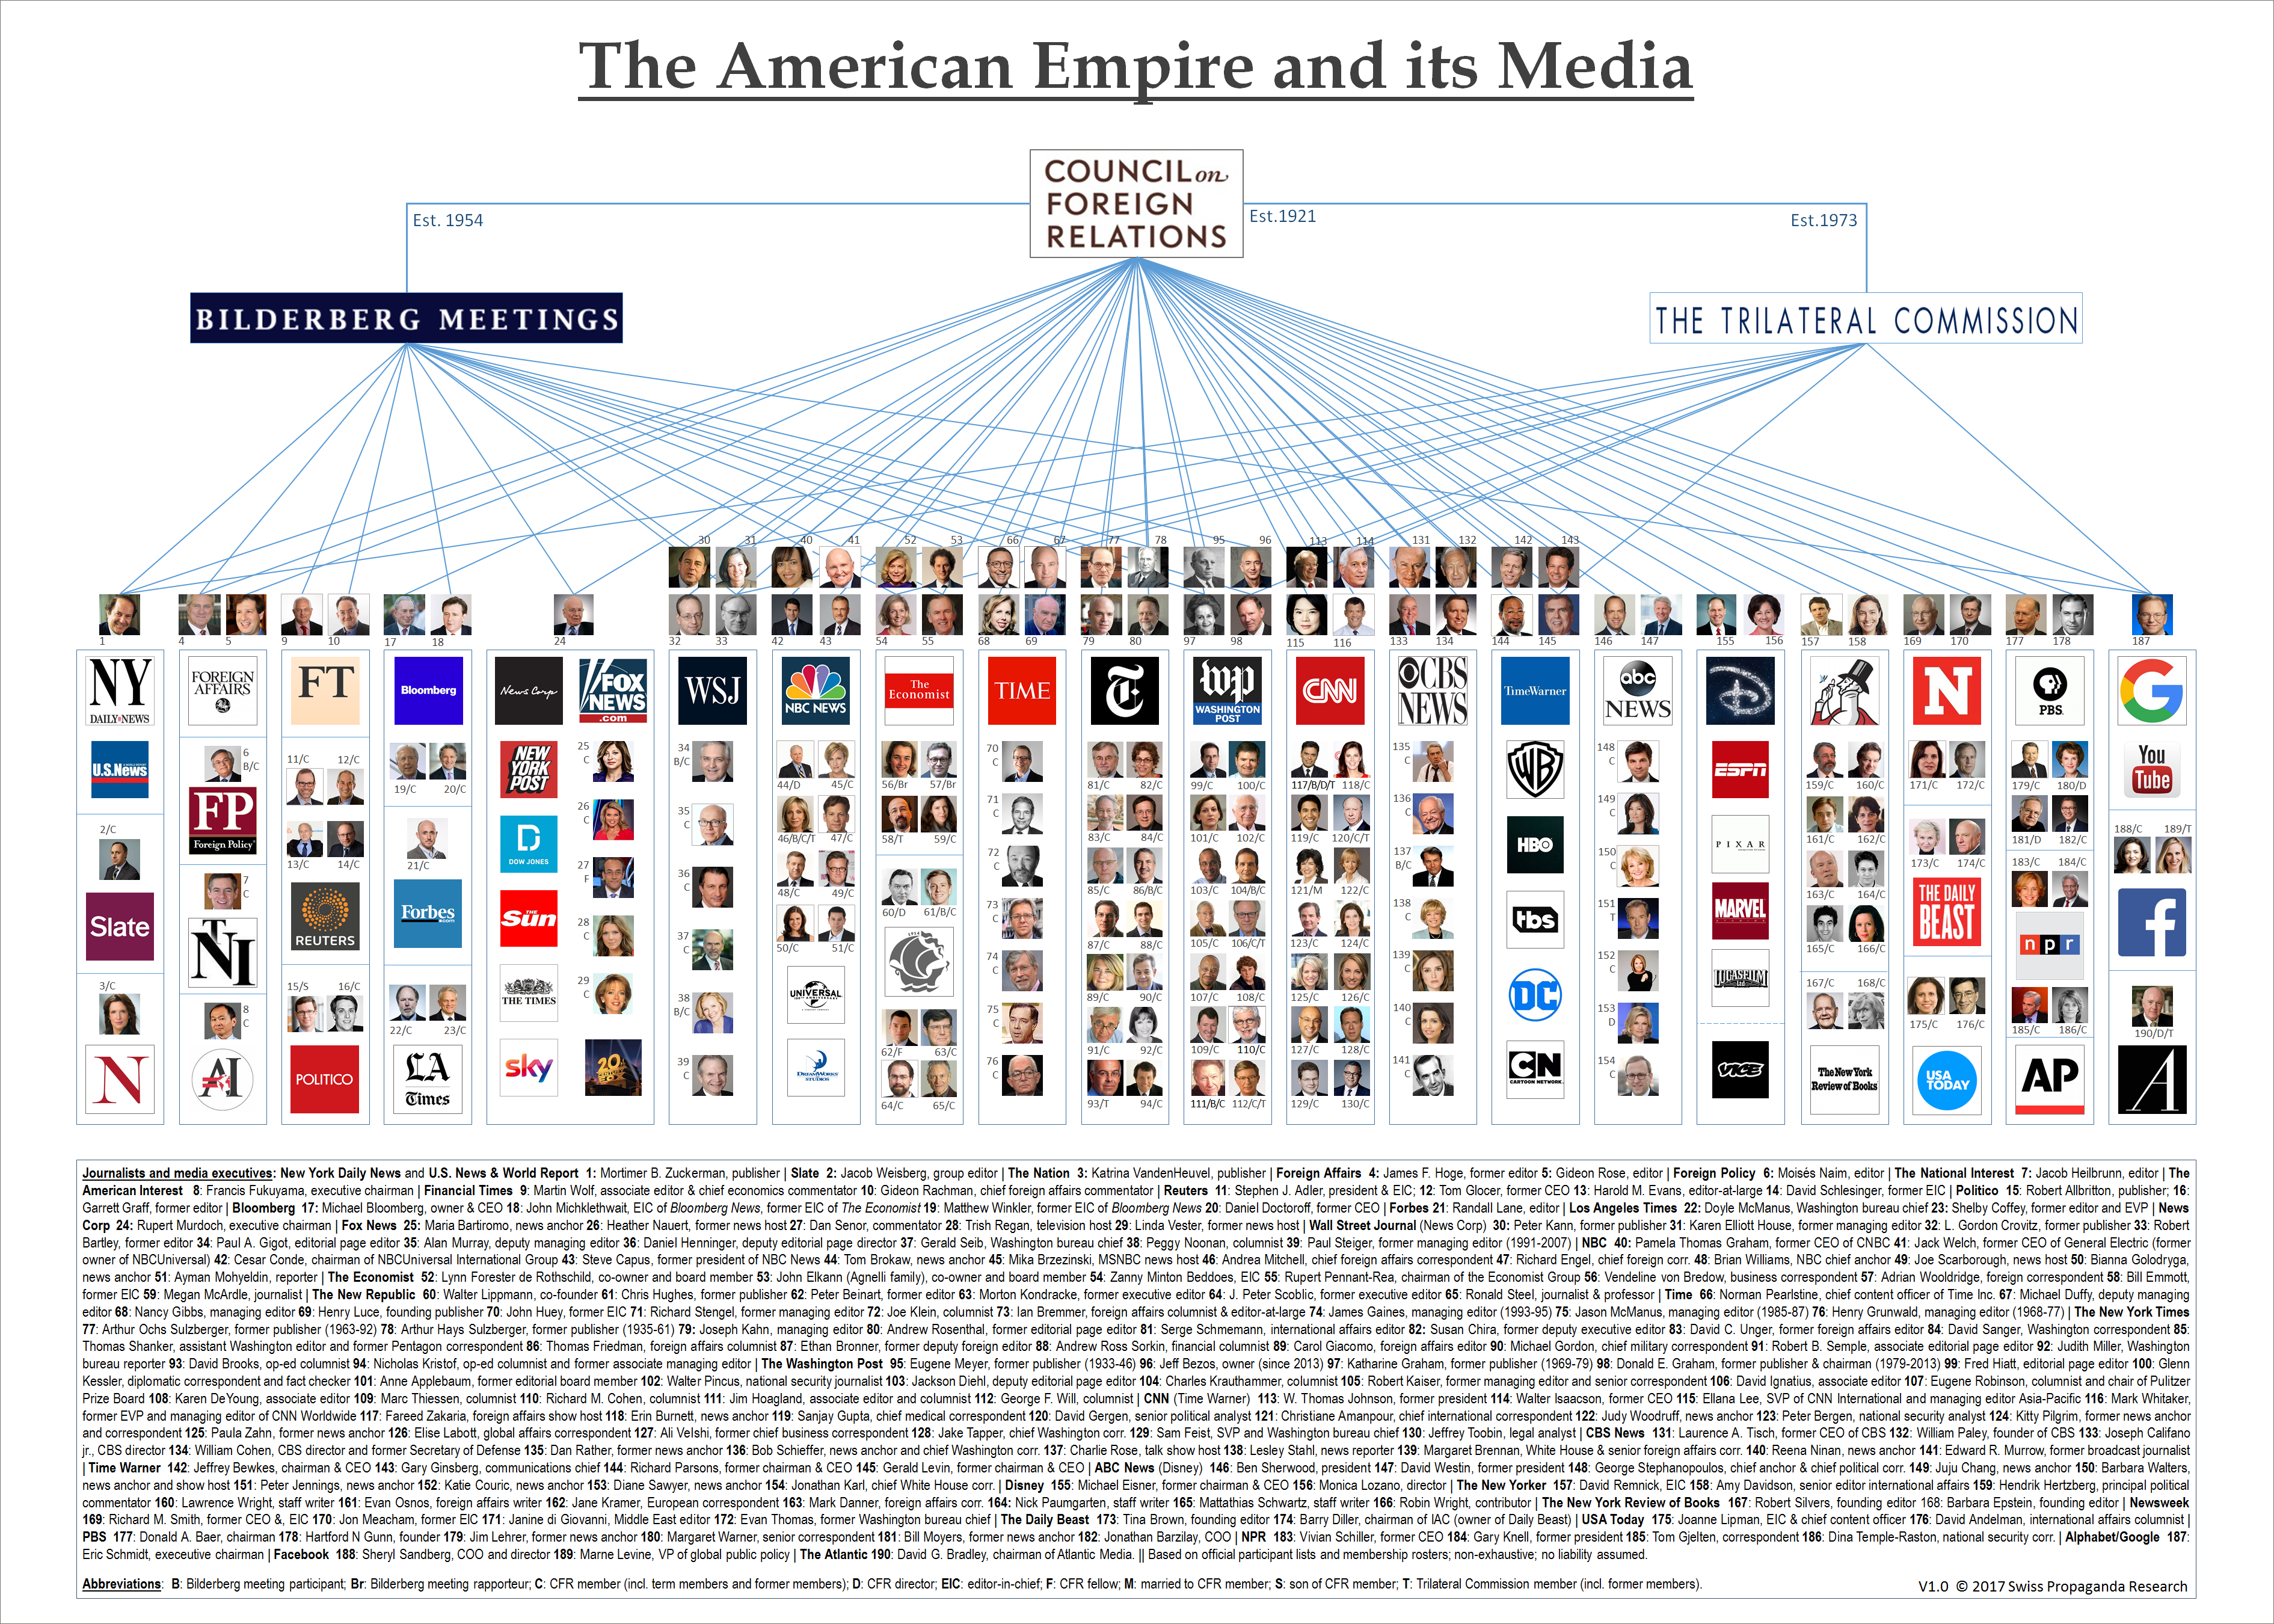 Swiss Policy Research: The American Empire and its Media